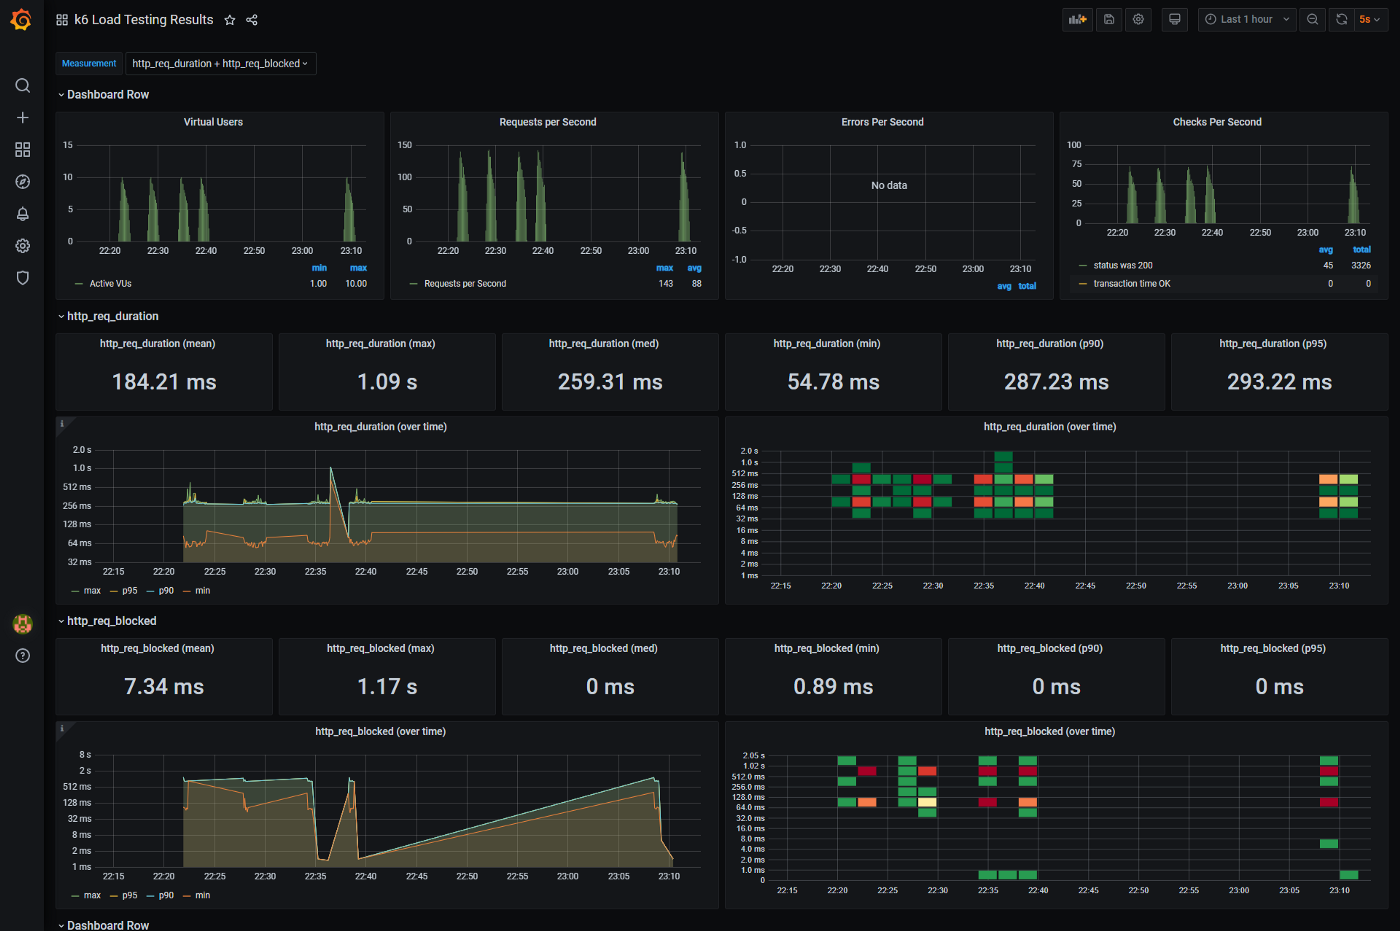 A dashboard displaying K6 load testing results